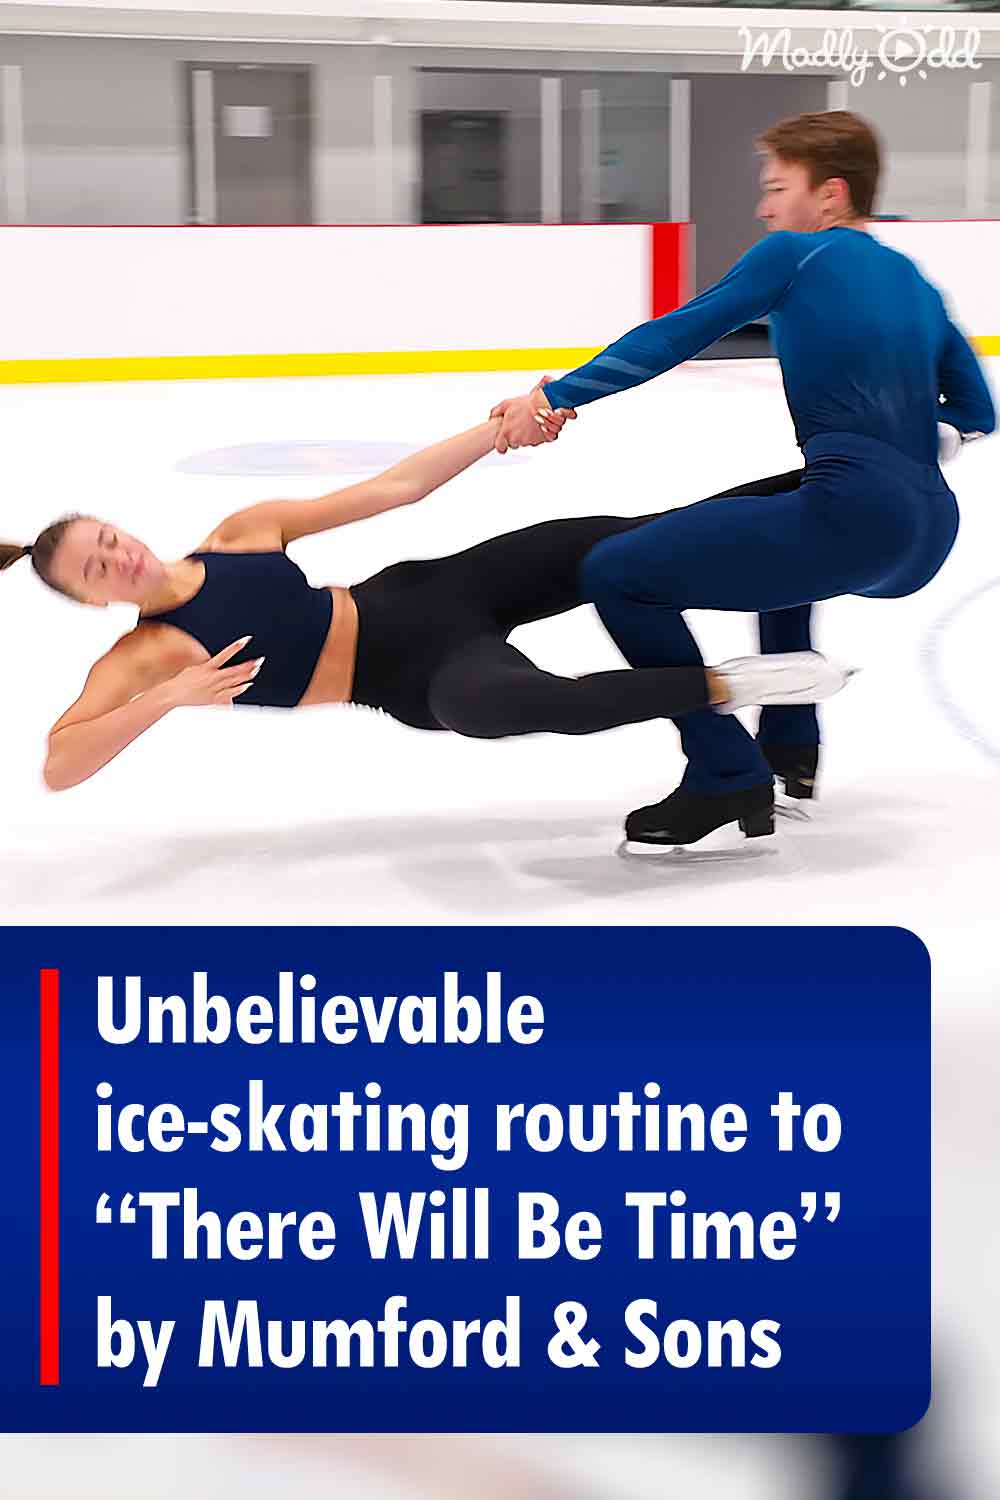 Unbelievable ice-skating routine to “There Will Be Time” by Mumford & Sons